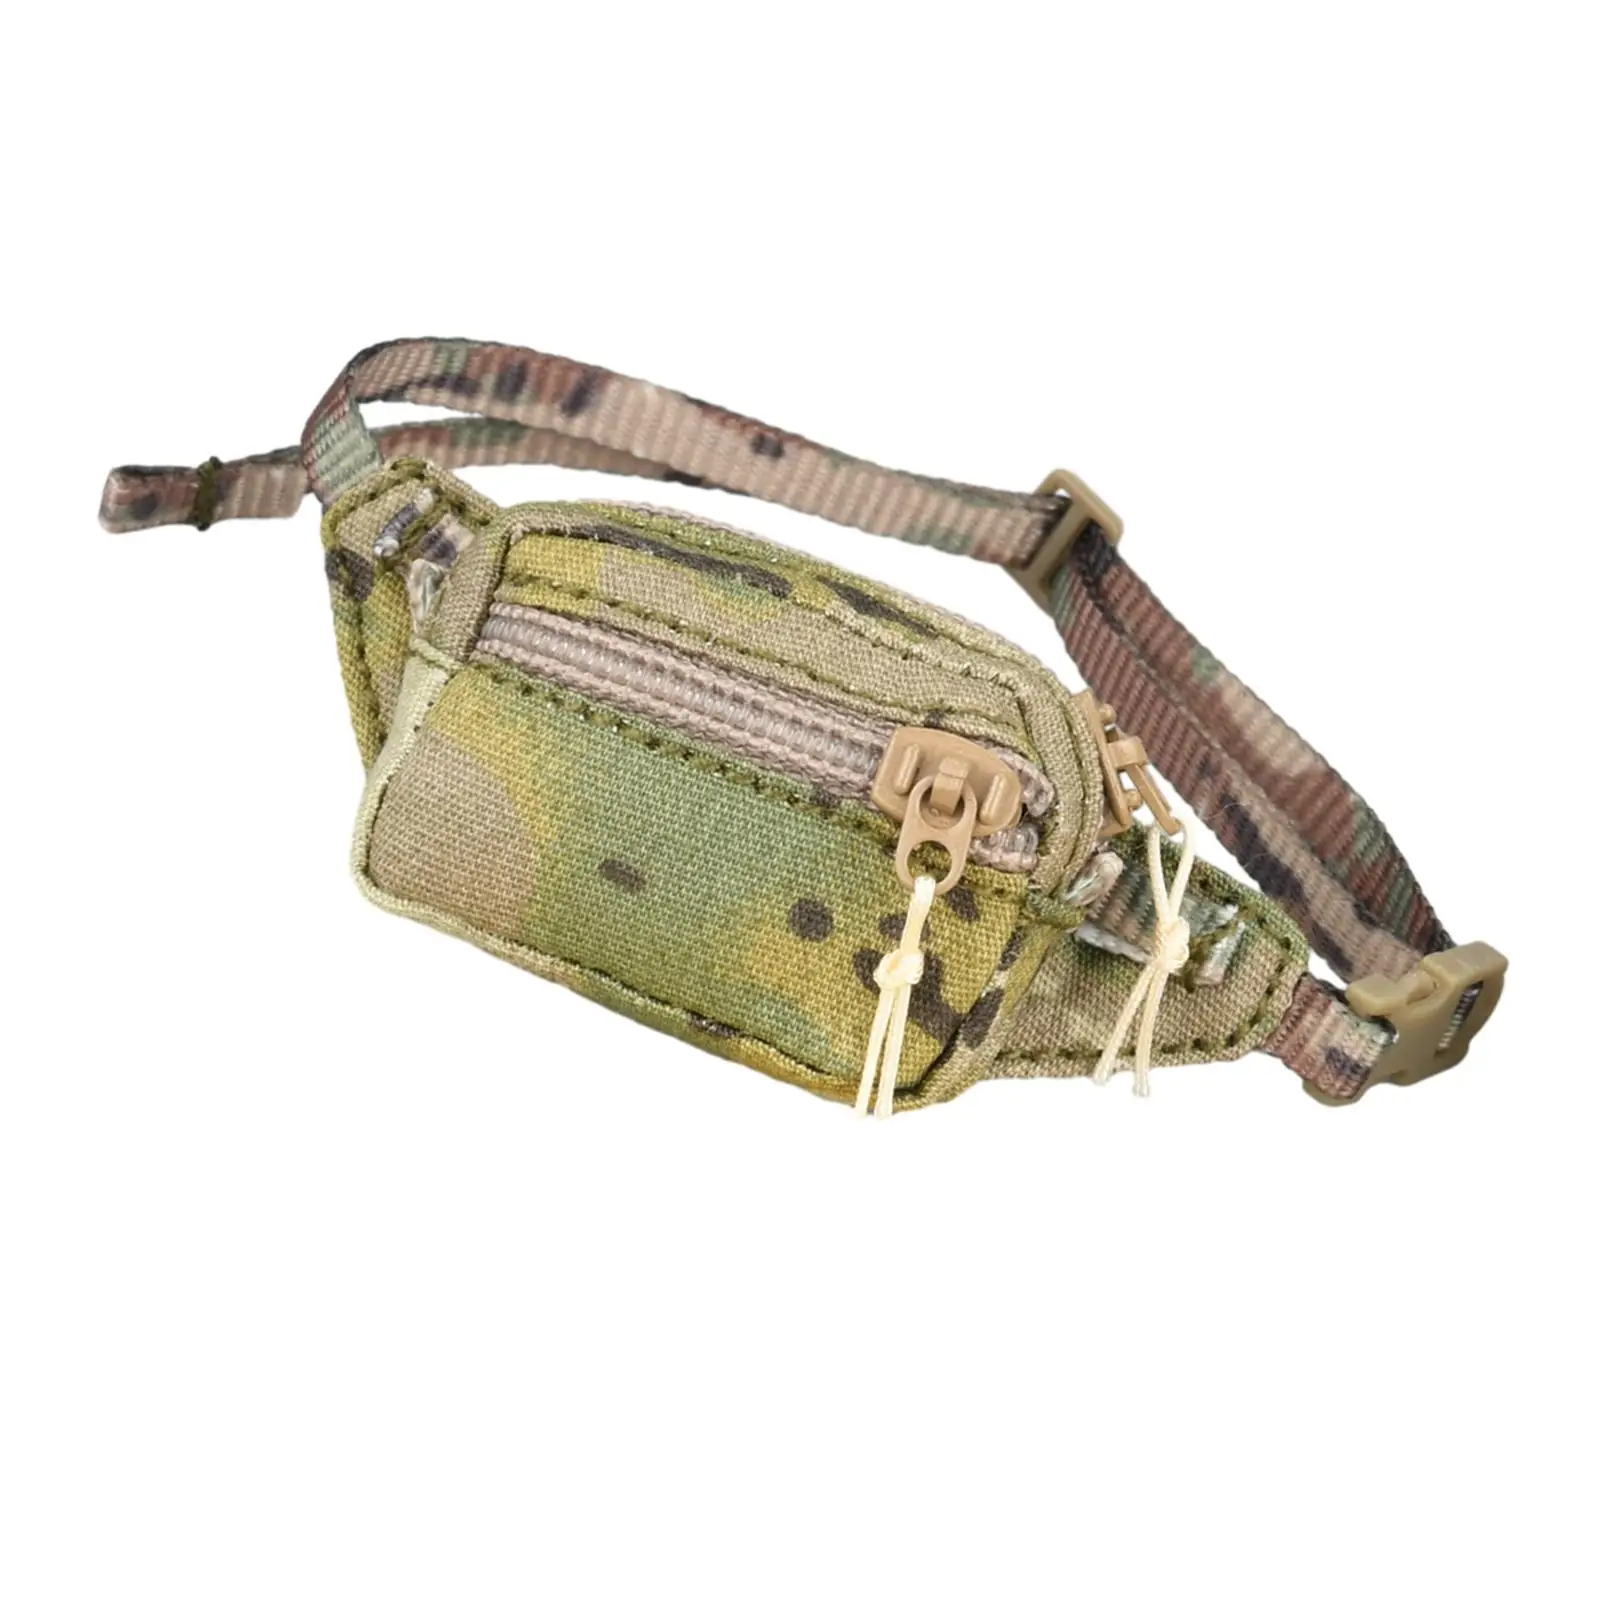 1/6 Scale Soldier Waist Bag\ Classic Waist Storage Bag Decoration Accessory Handmade for 12 inch Male Action Figures Accessory